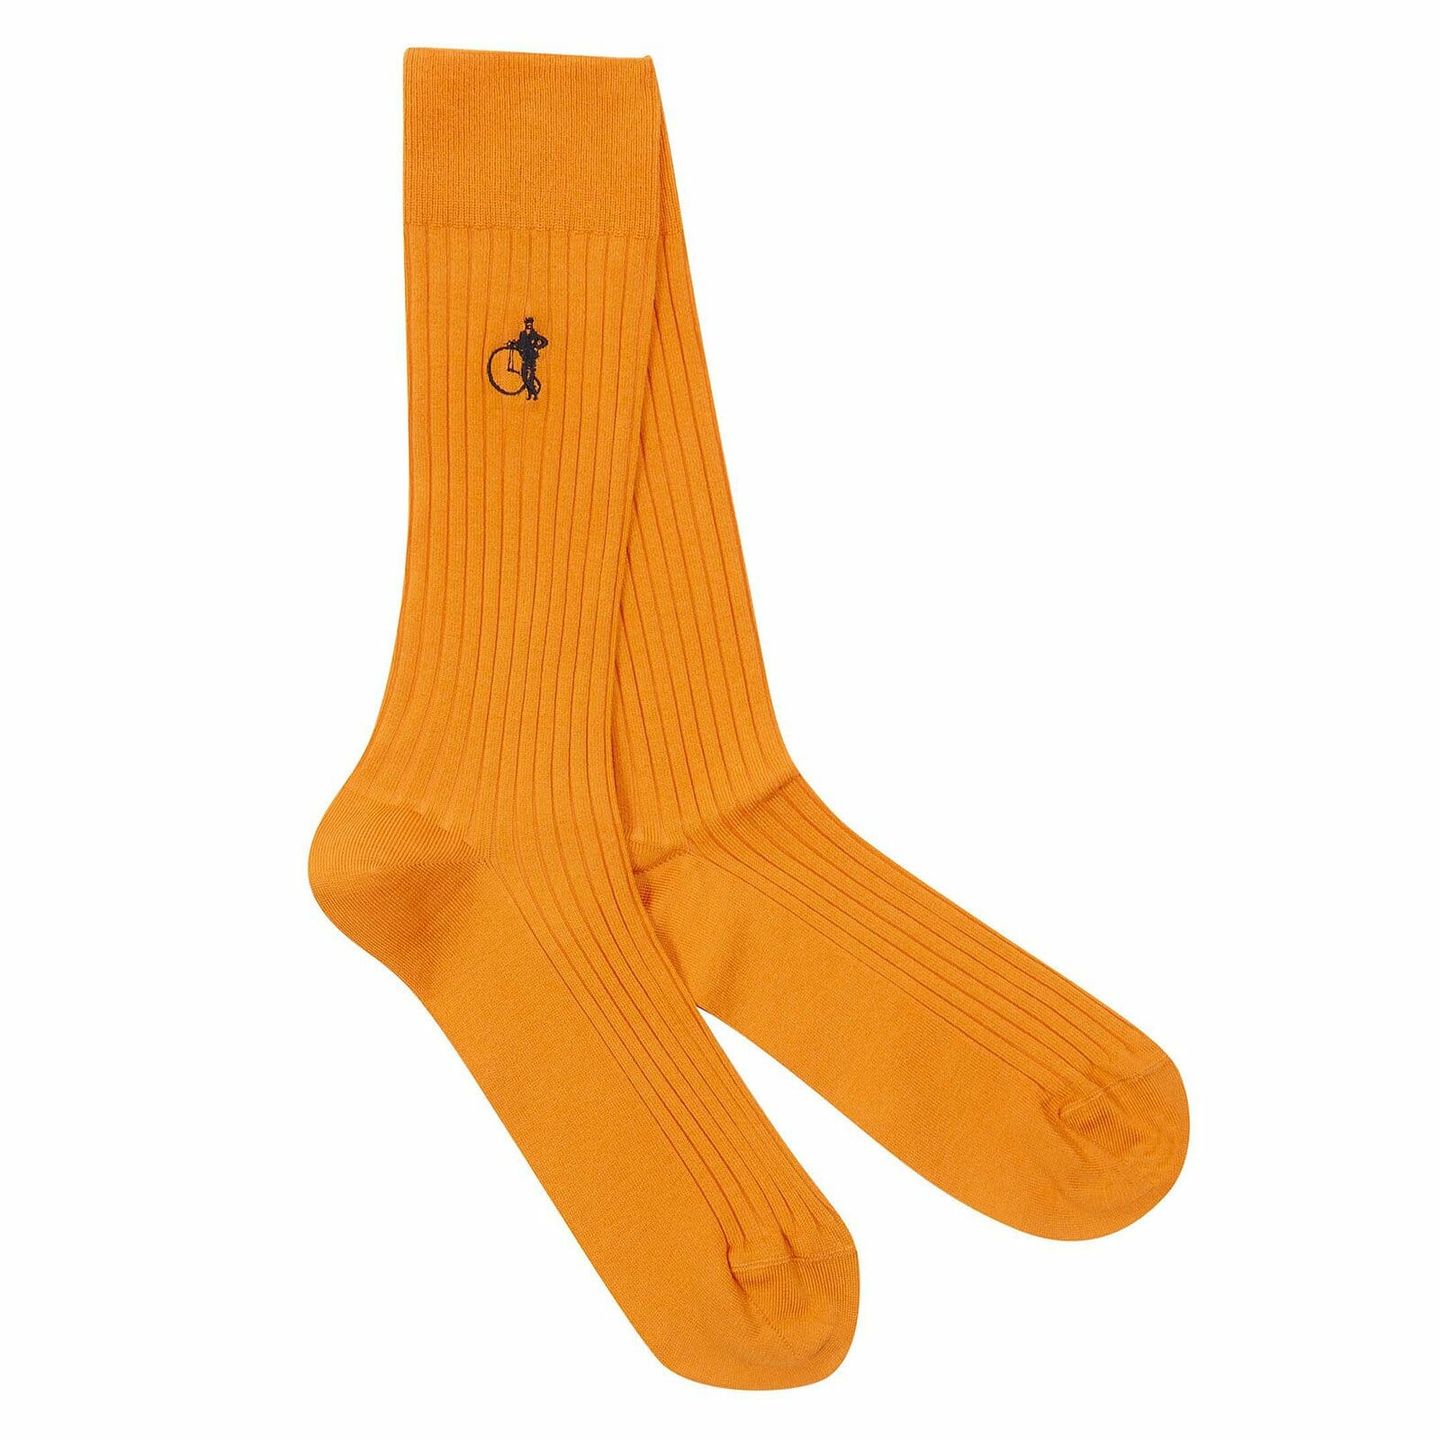 A pair of simply sartorial socks in east India saffron